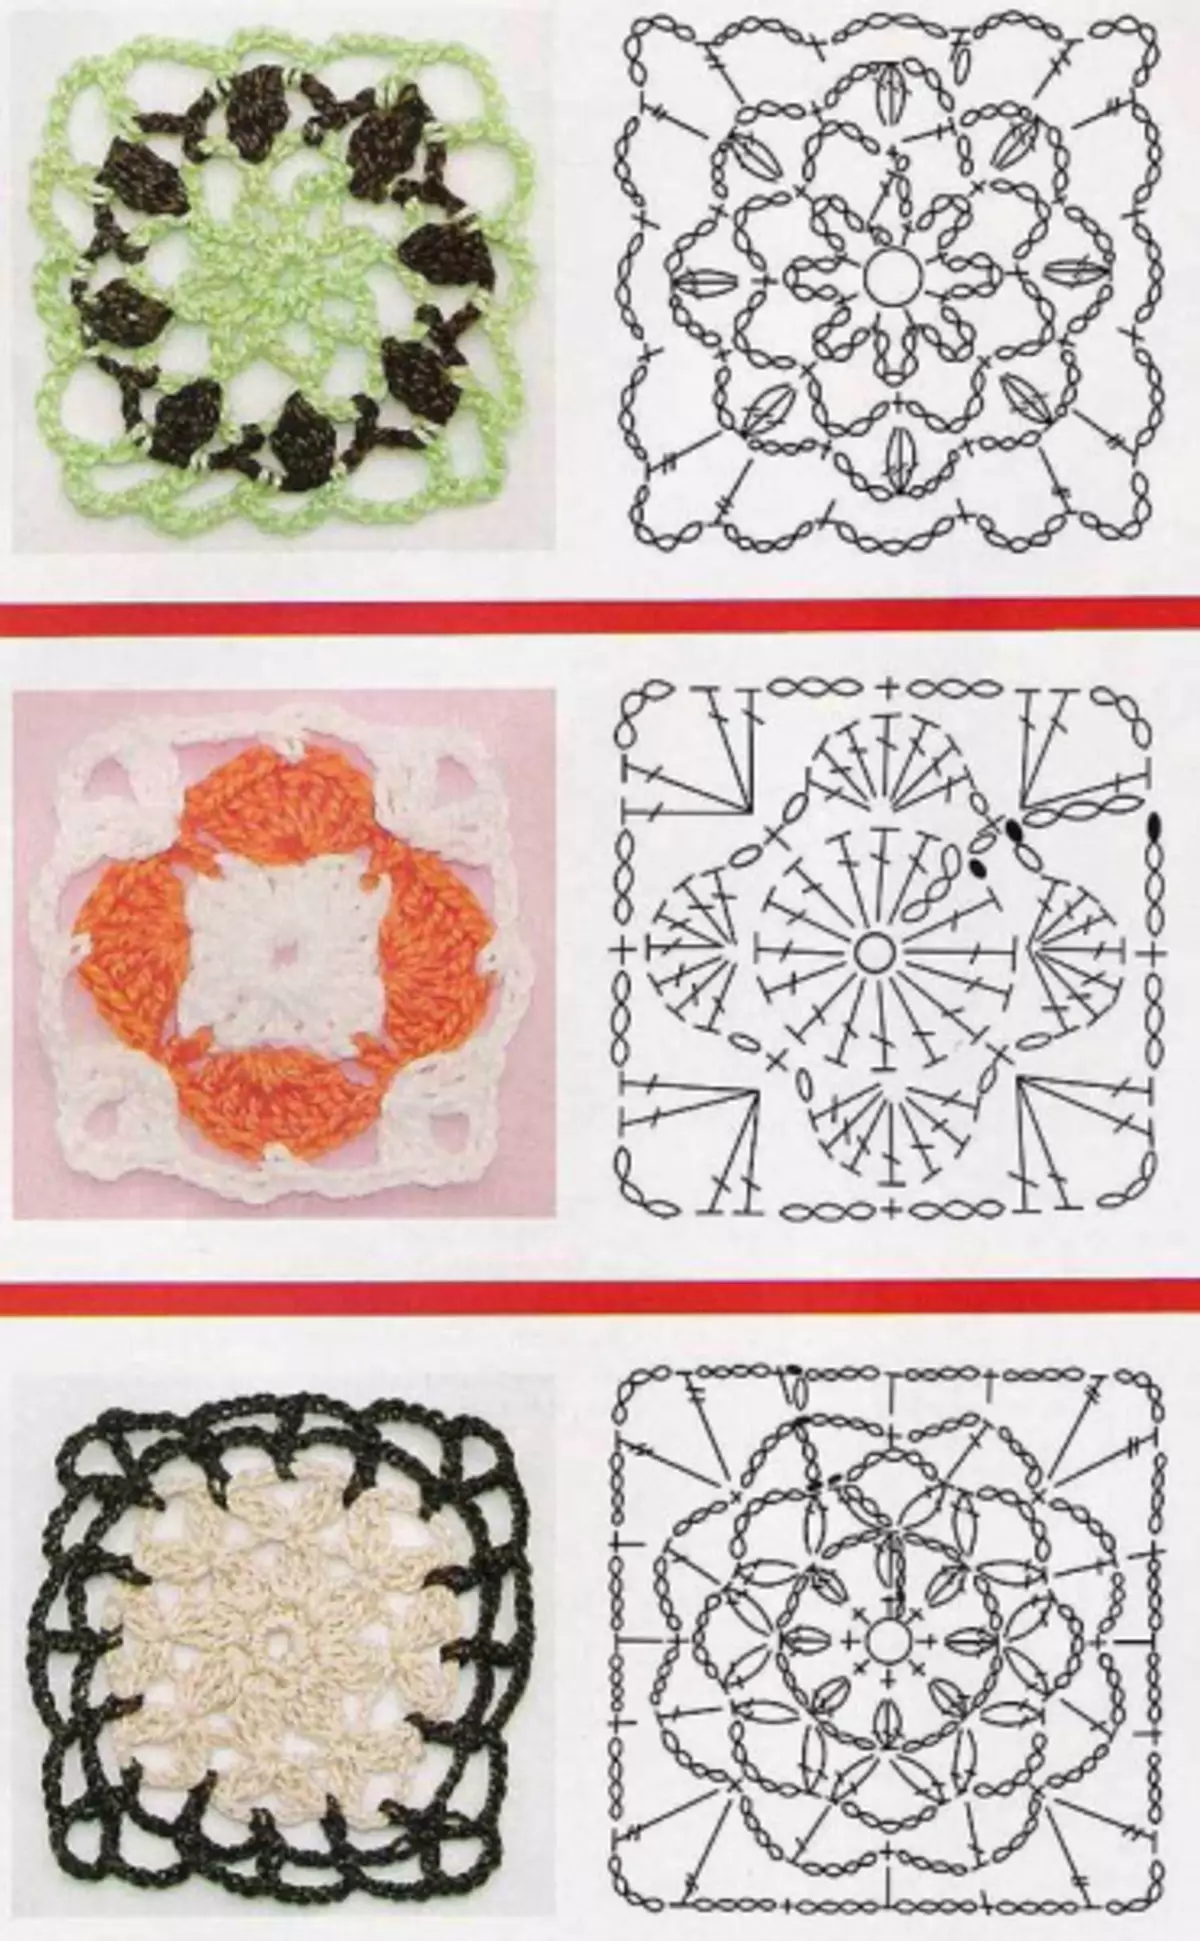 Round and square crochet motifs with schemes